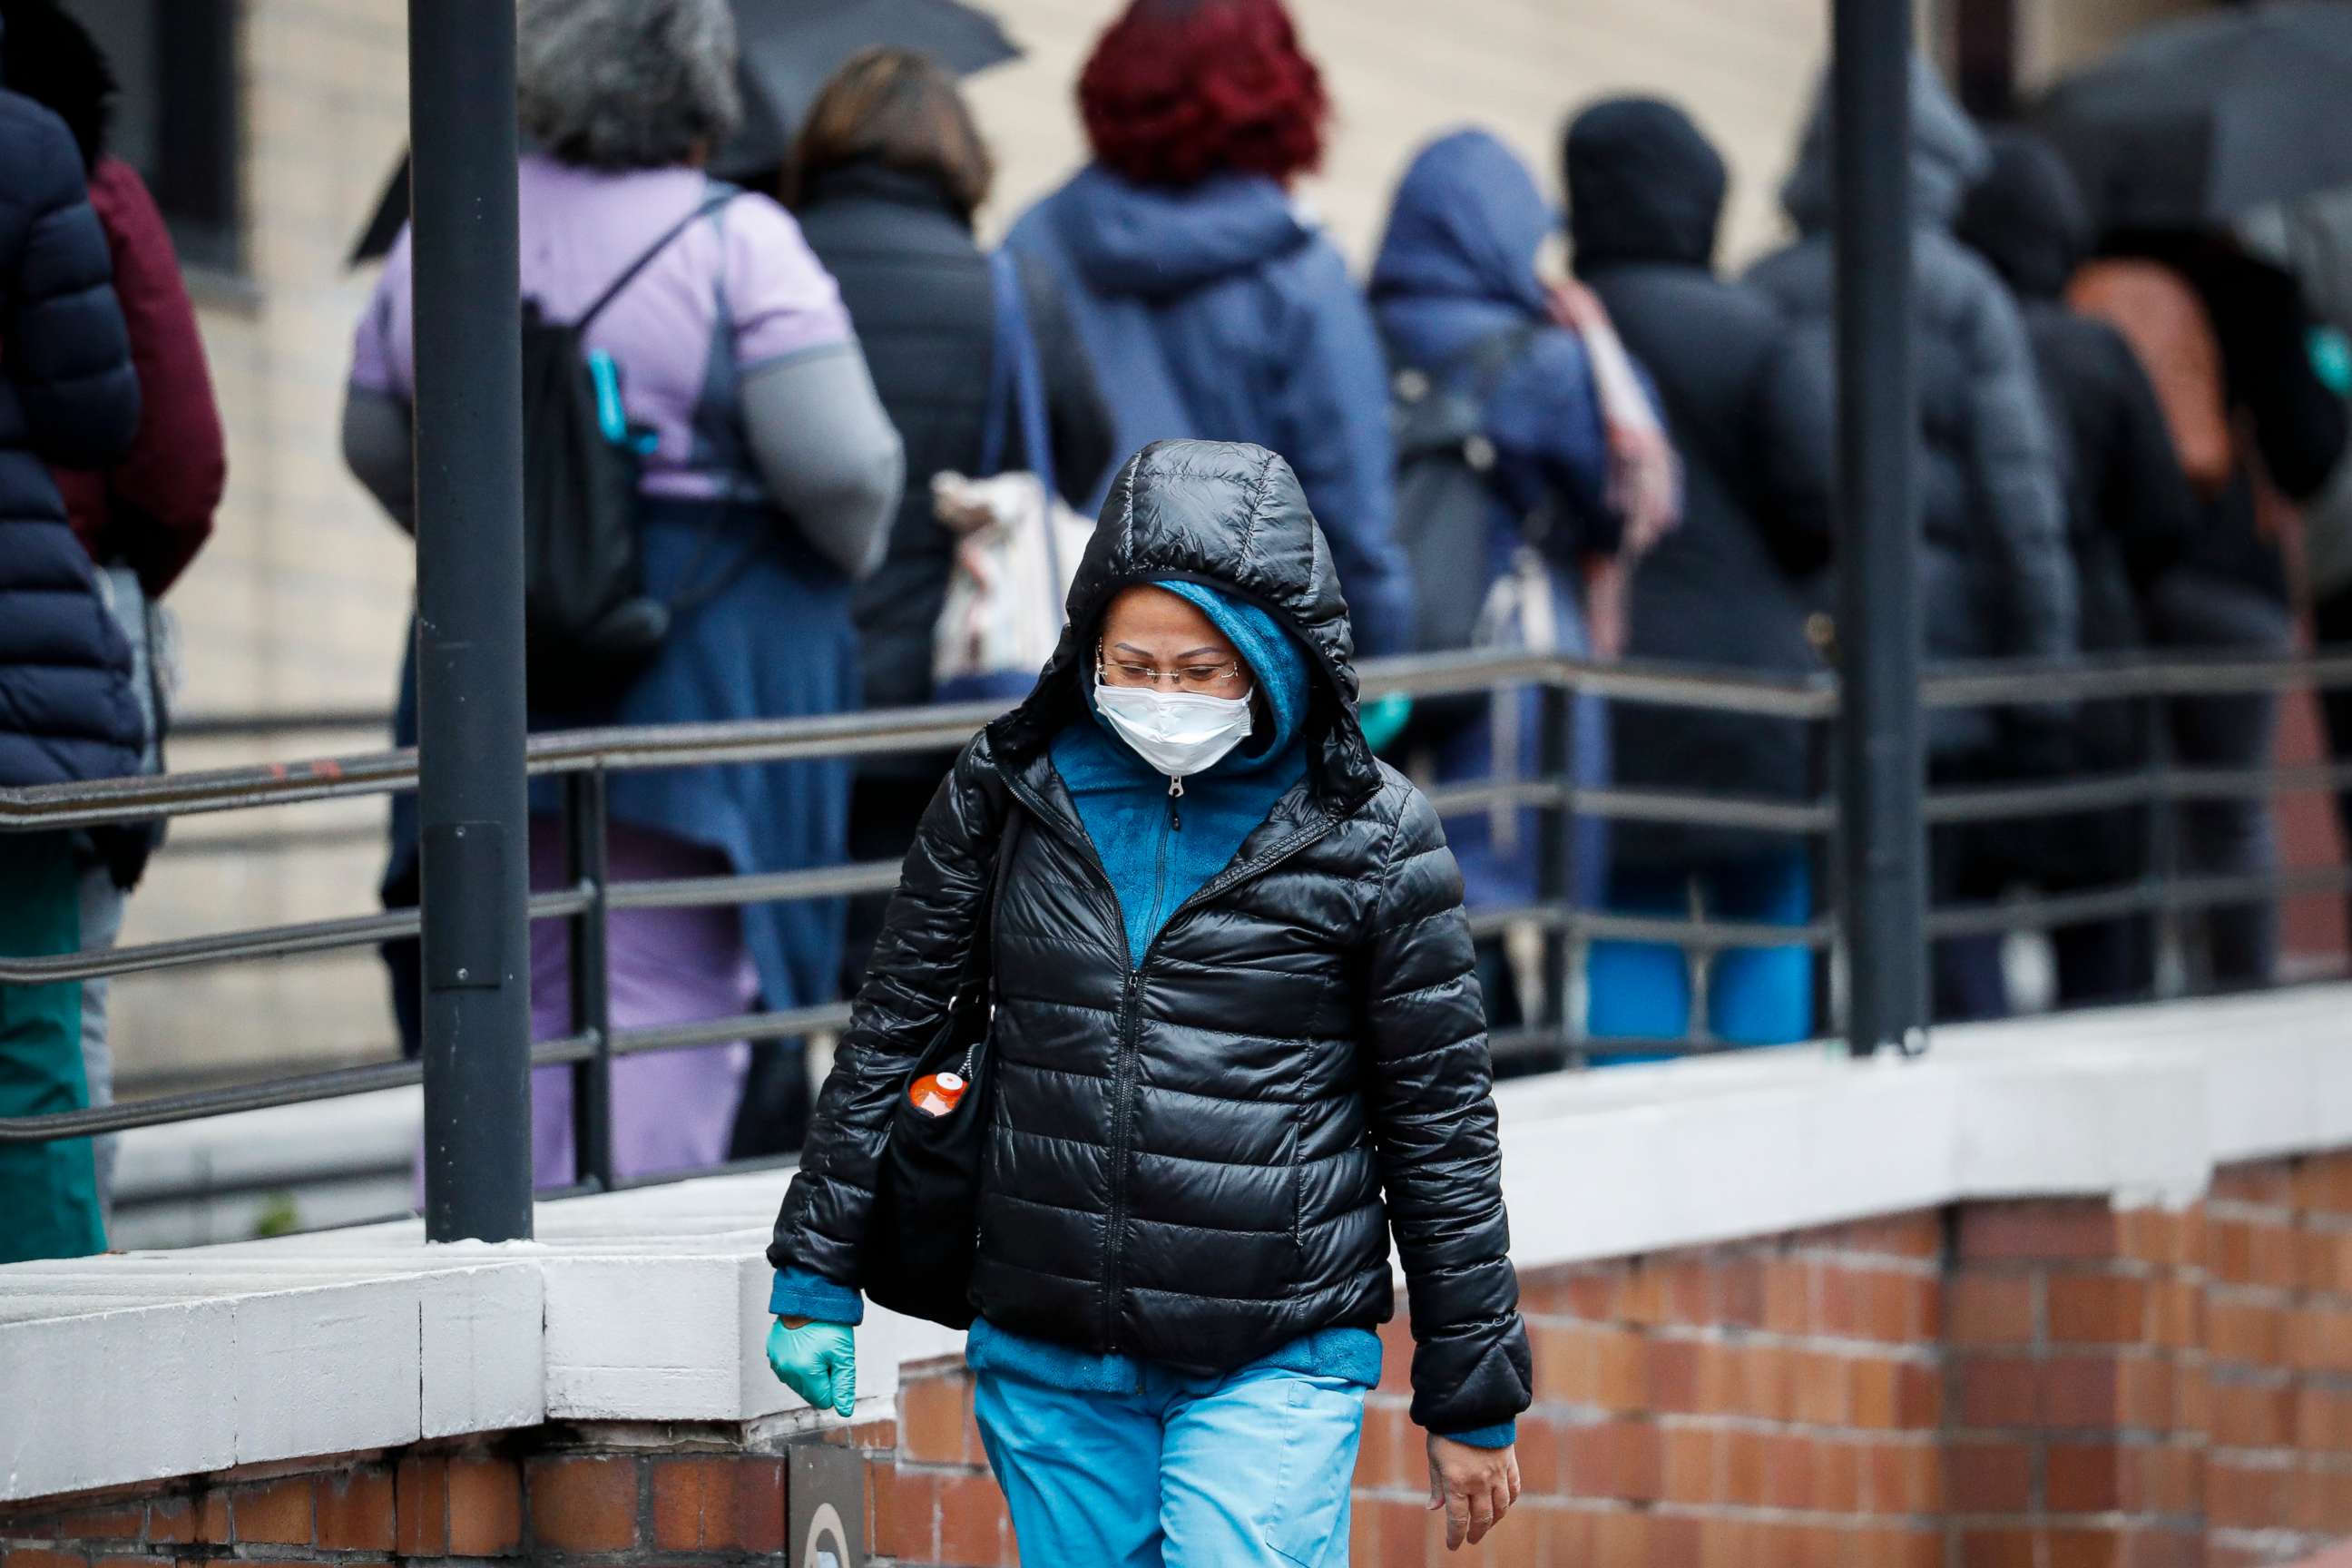 PHOTO: A medical worker walks past a line of workers and visitors waiting to be tested for coronavirus, at the main entrance to the Department of Veterans Affairs Medical Center, March 23, 2020, in New York.  